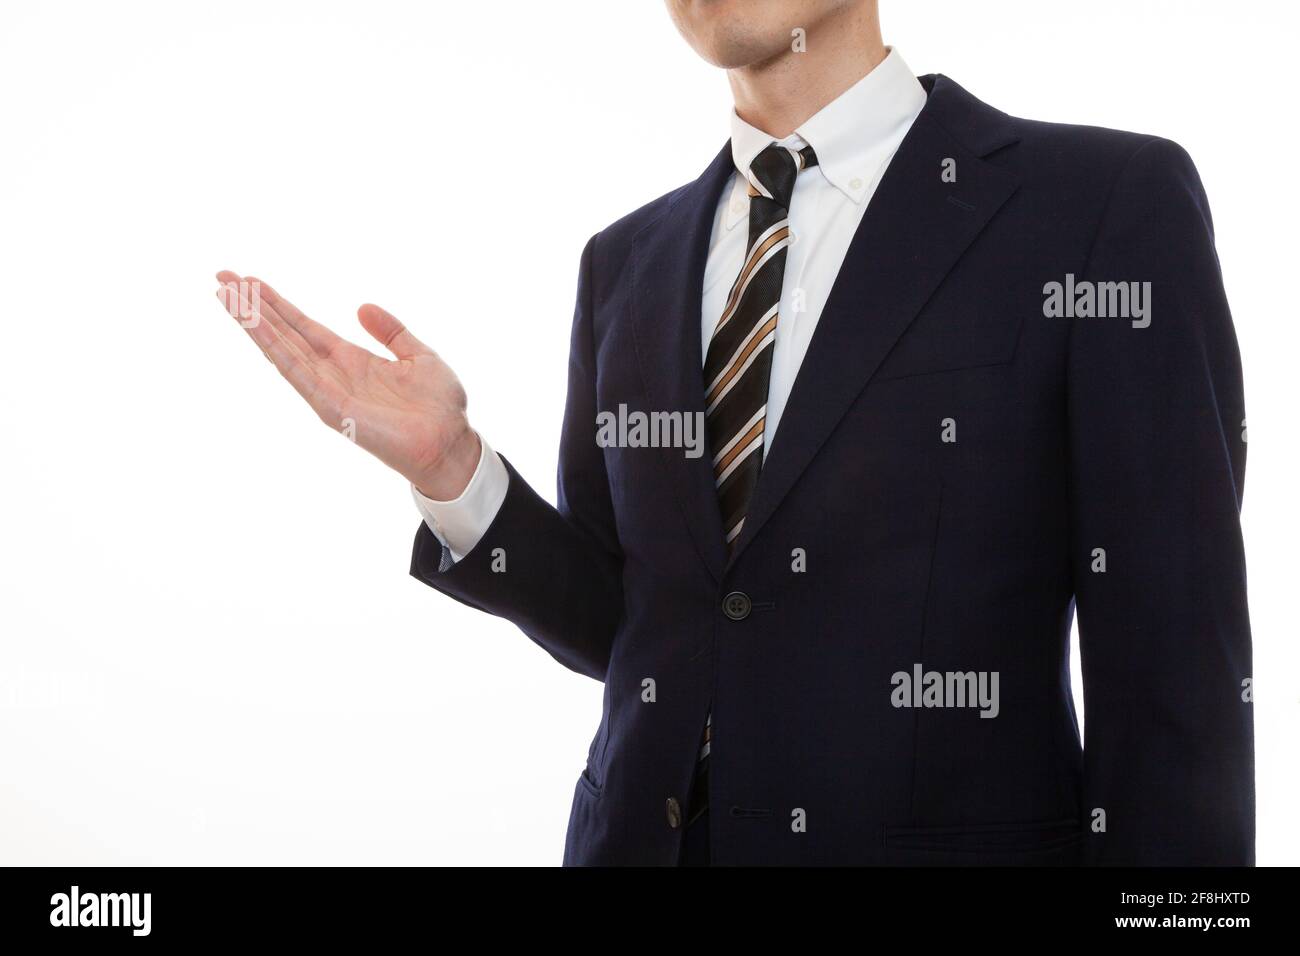 Business person to introduce and explain, upper body Stock Photo